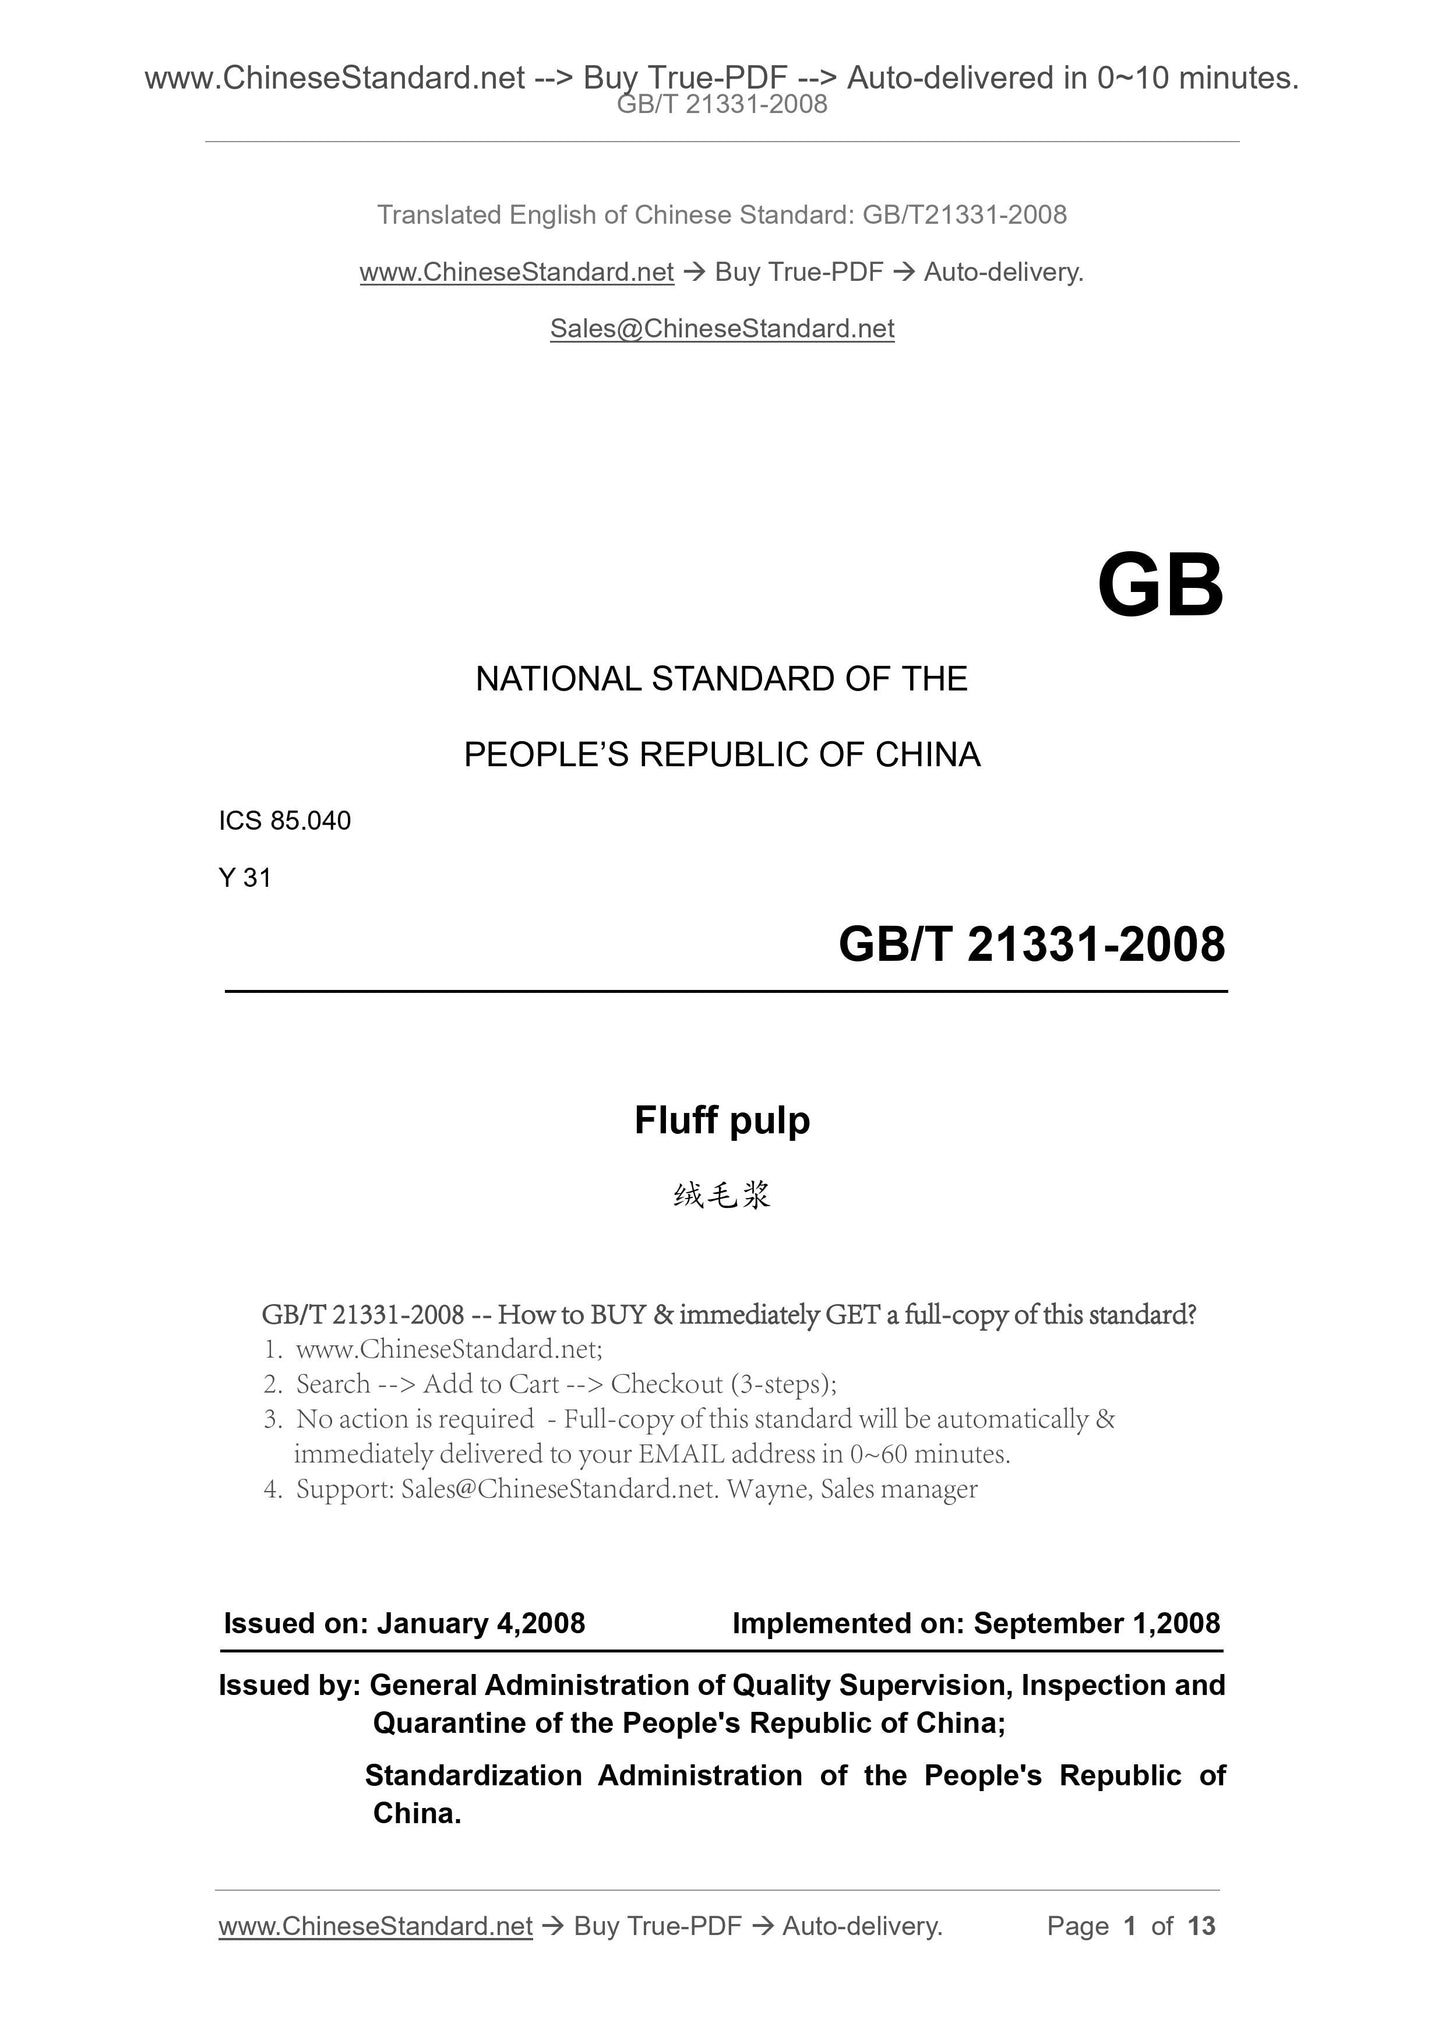 GB/T 21331-2008 Page 1